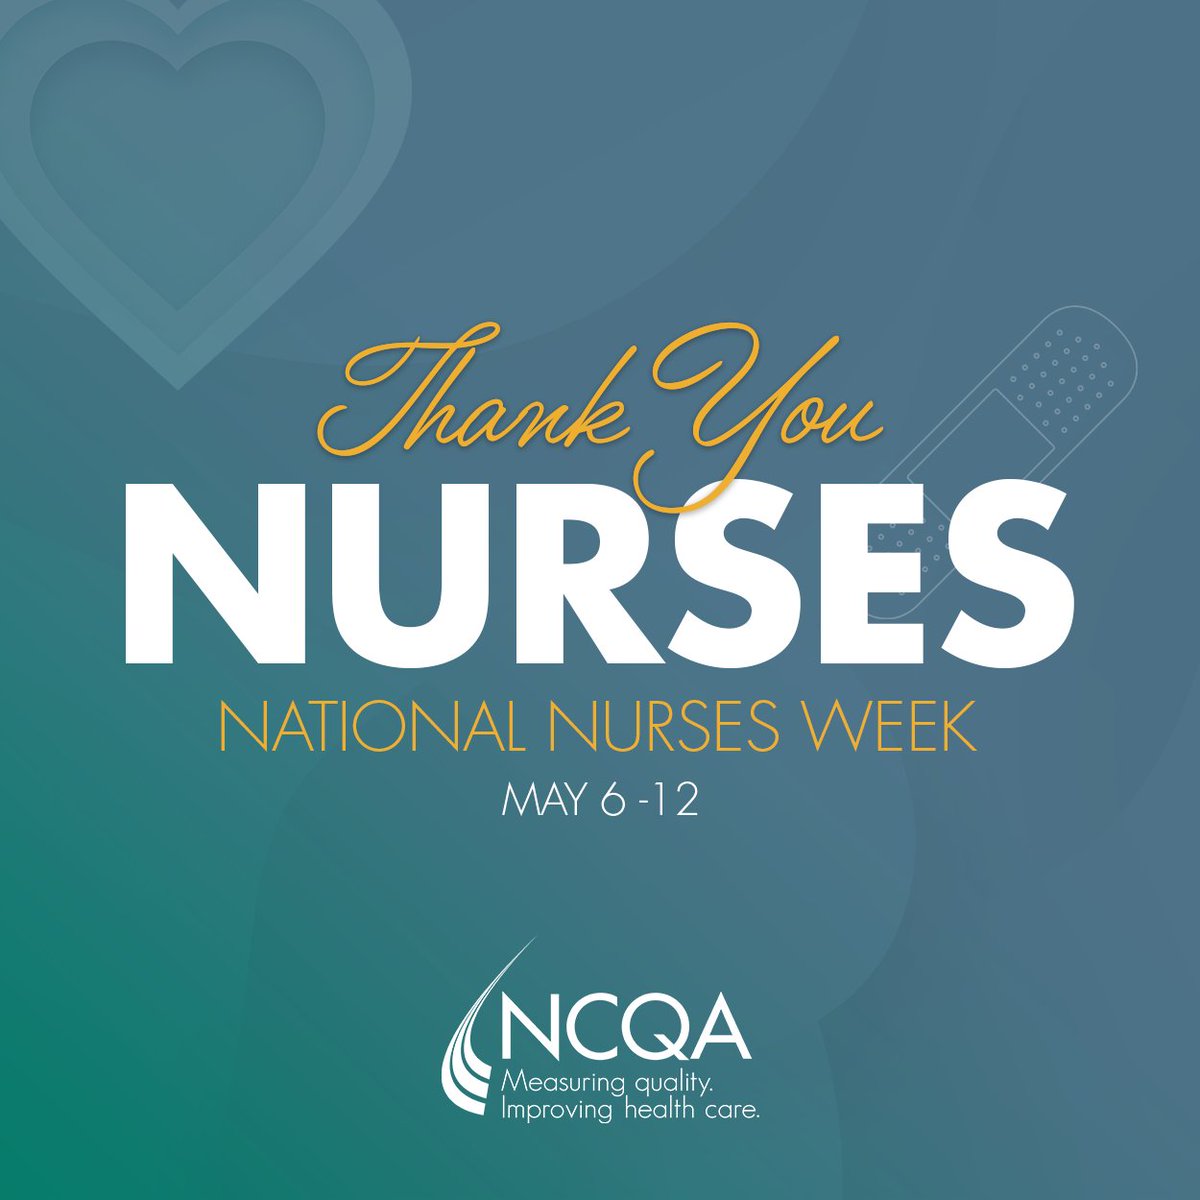 'Hospitals are dependent on the dedication of nurses.' - @PeggyNCQA, President

#NCQA would like to thank all nurses across the country for the impact that they make in patient's' lives every day. They are truly the heart of healthcare. #NationalNursesWeek #HealthEquity